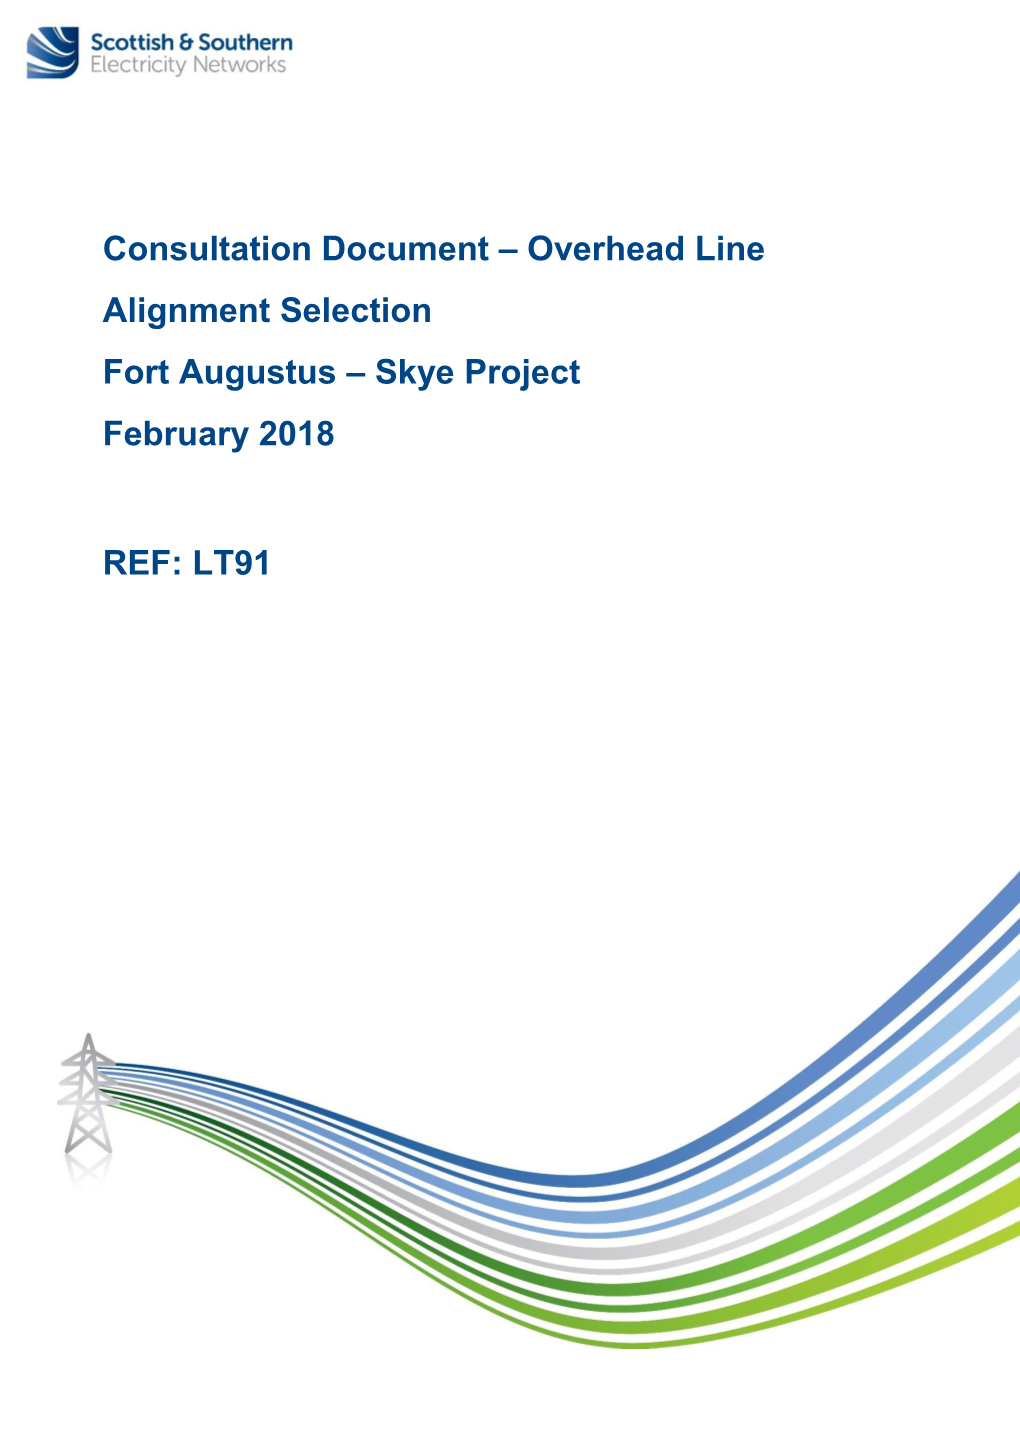 Overhead Line Alignment Selection Fort Augustus – Skye Project February 2018